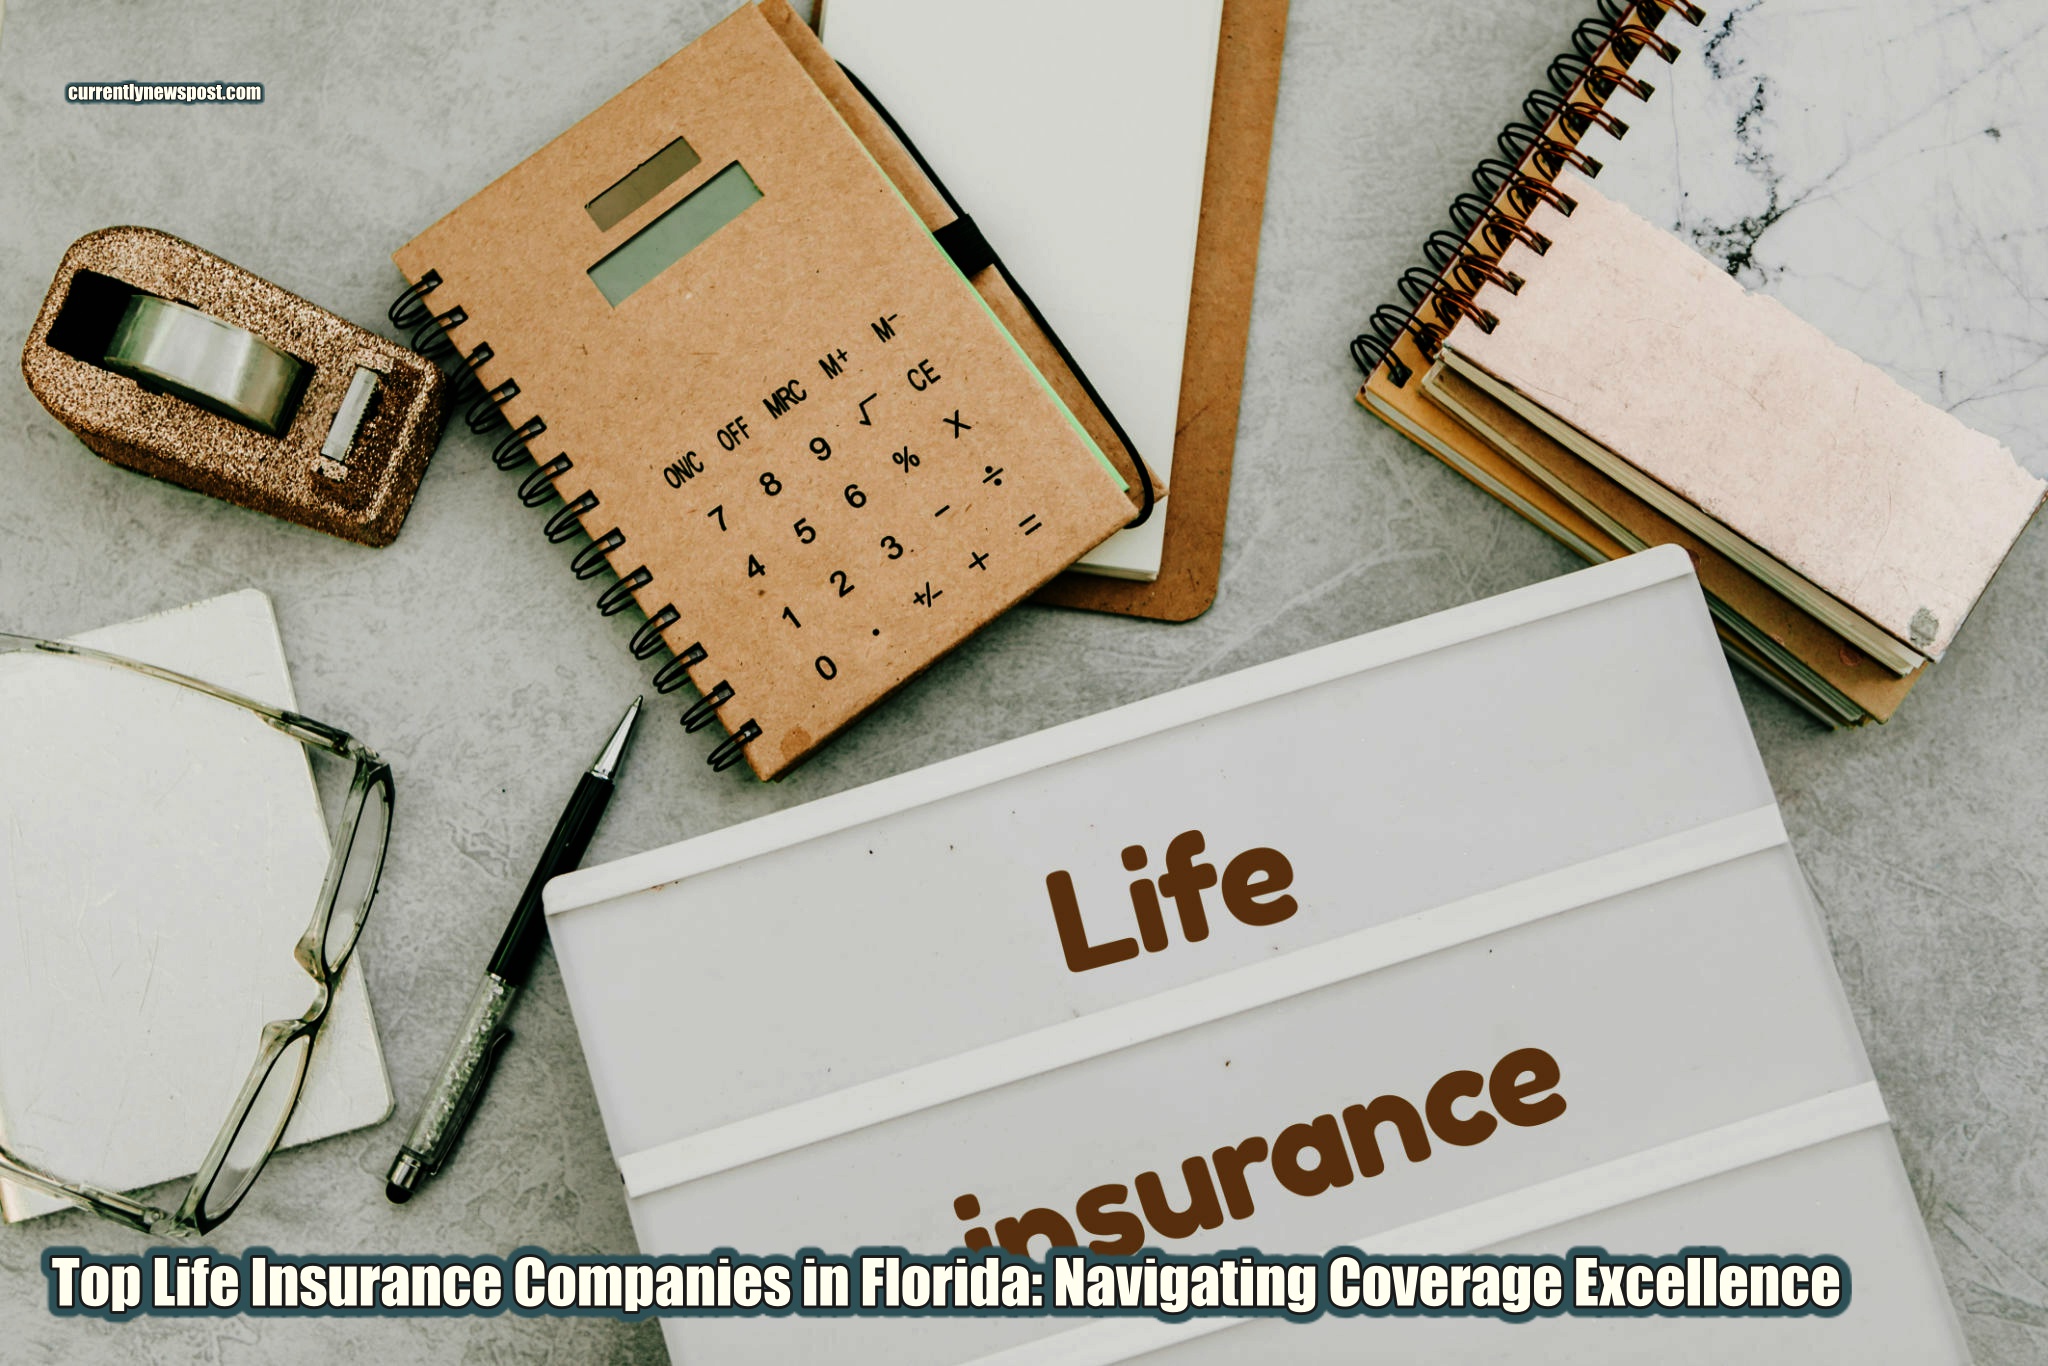 Top Life Insurance Companies in Florida: Navigating Coverage Excellence